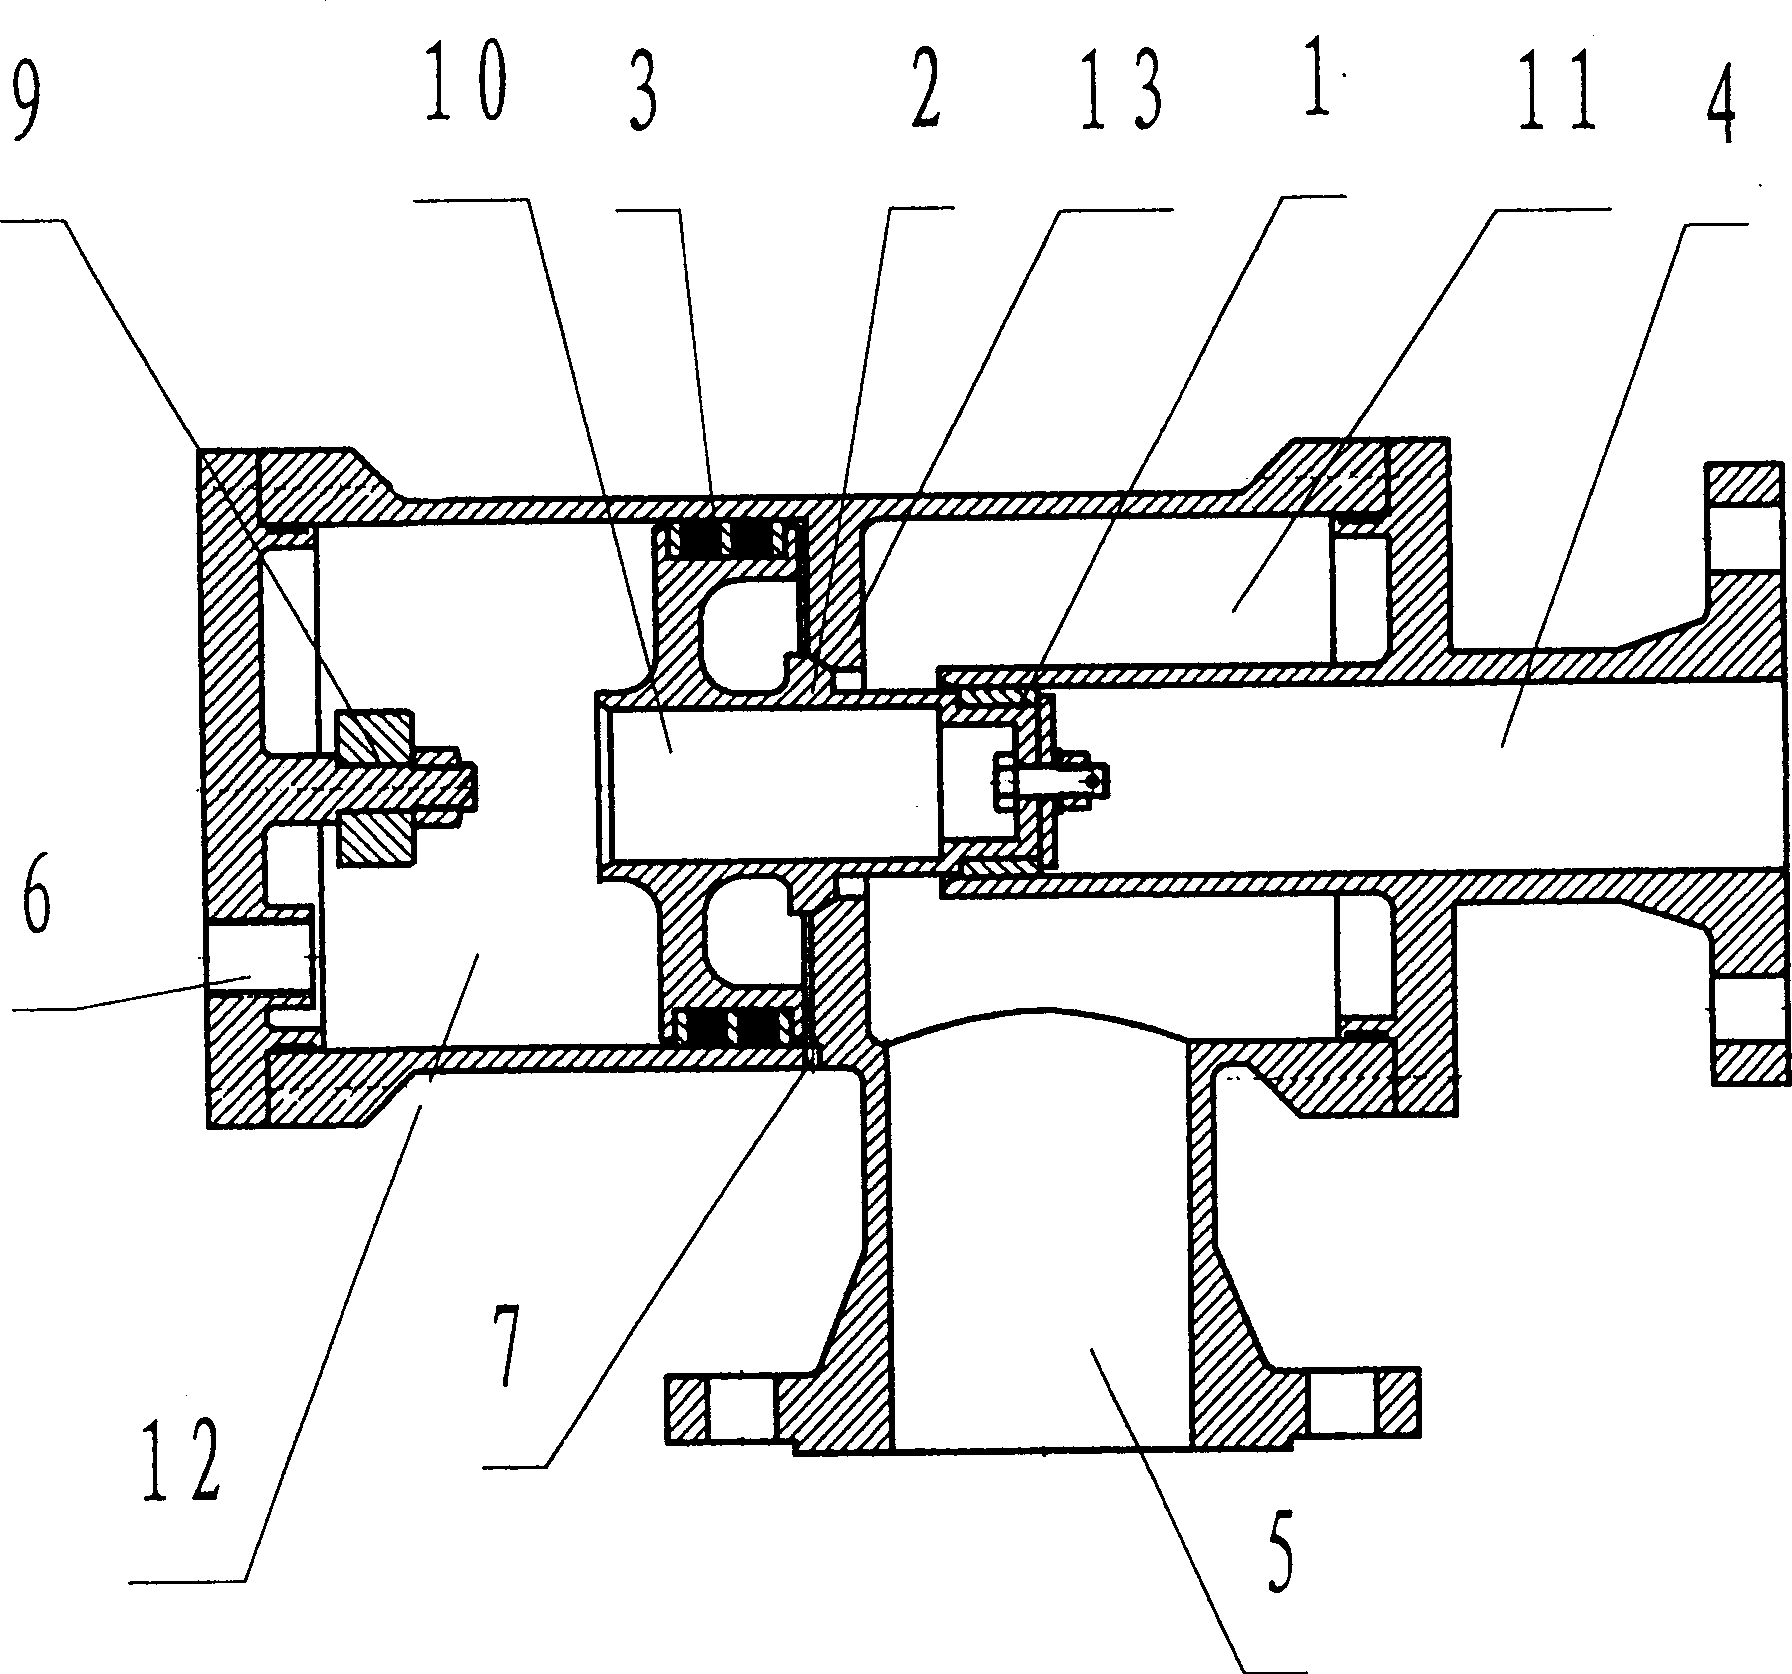 Gas shock-wave generating device